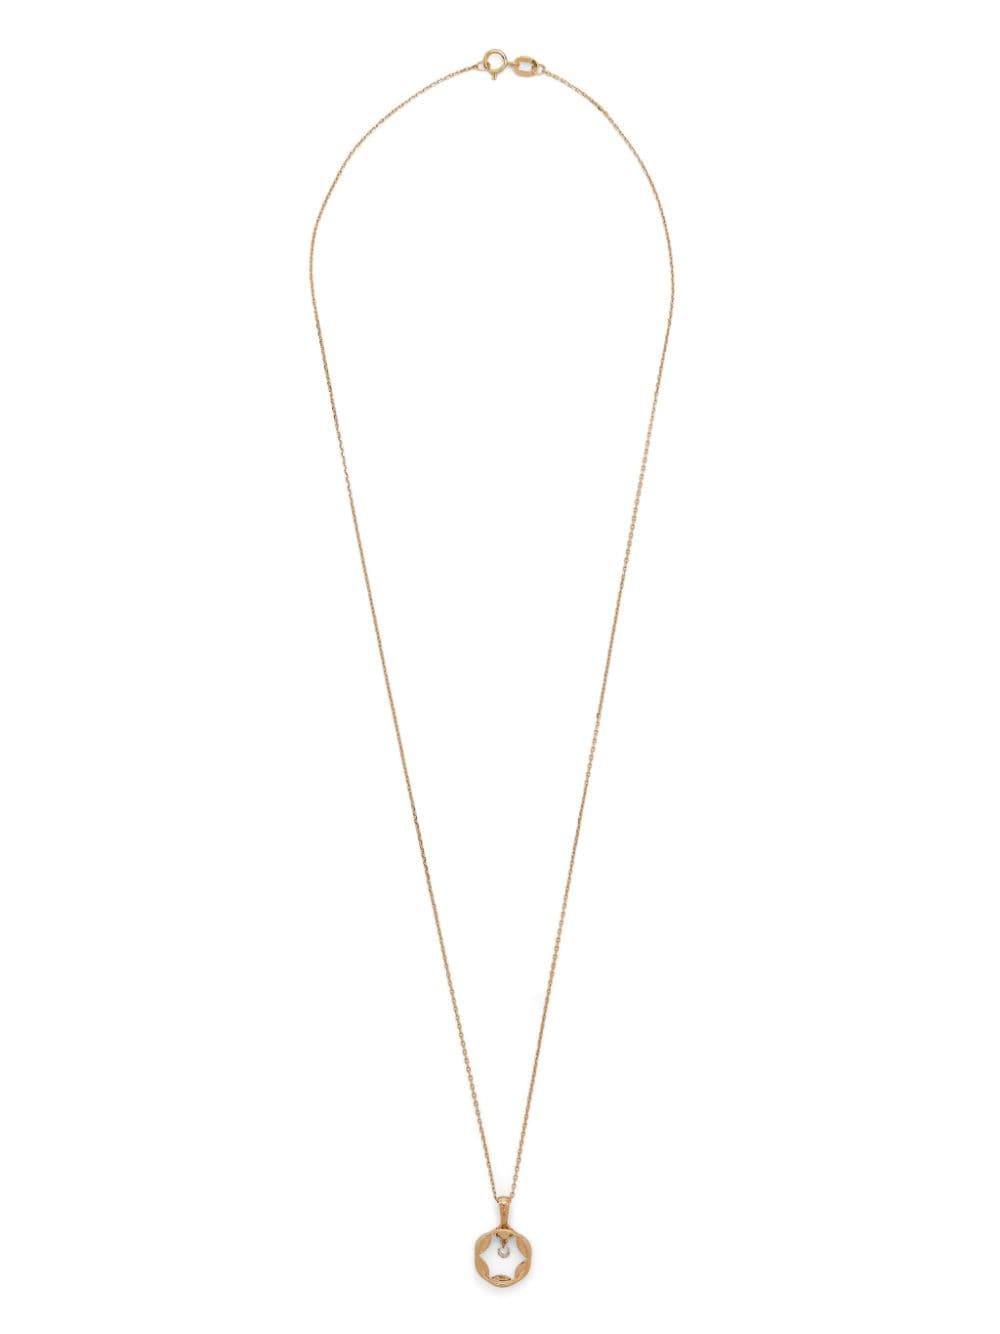 Swayta Sha 18kt Yellow Gold Cut-out Pendant Necklace